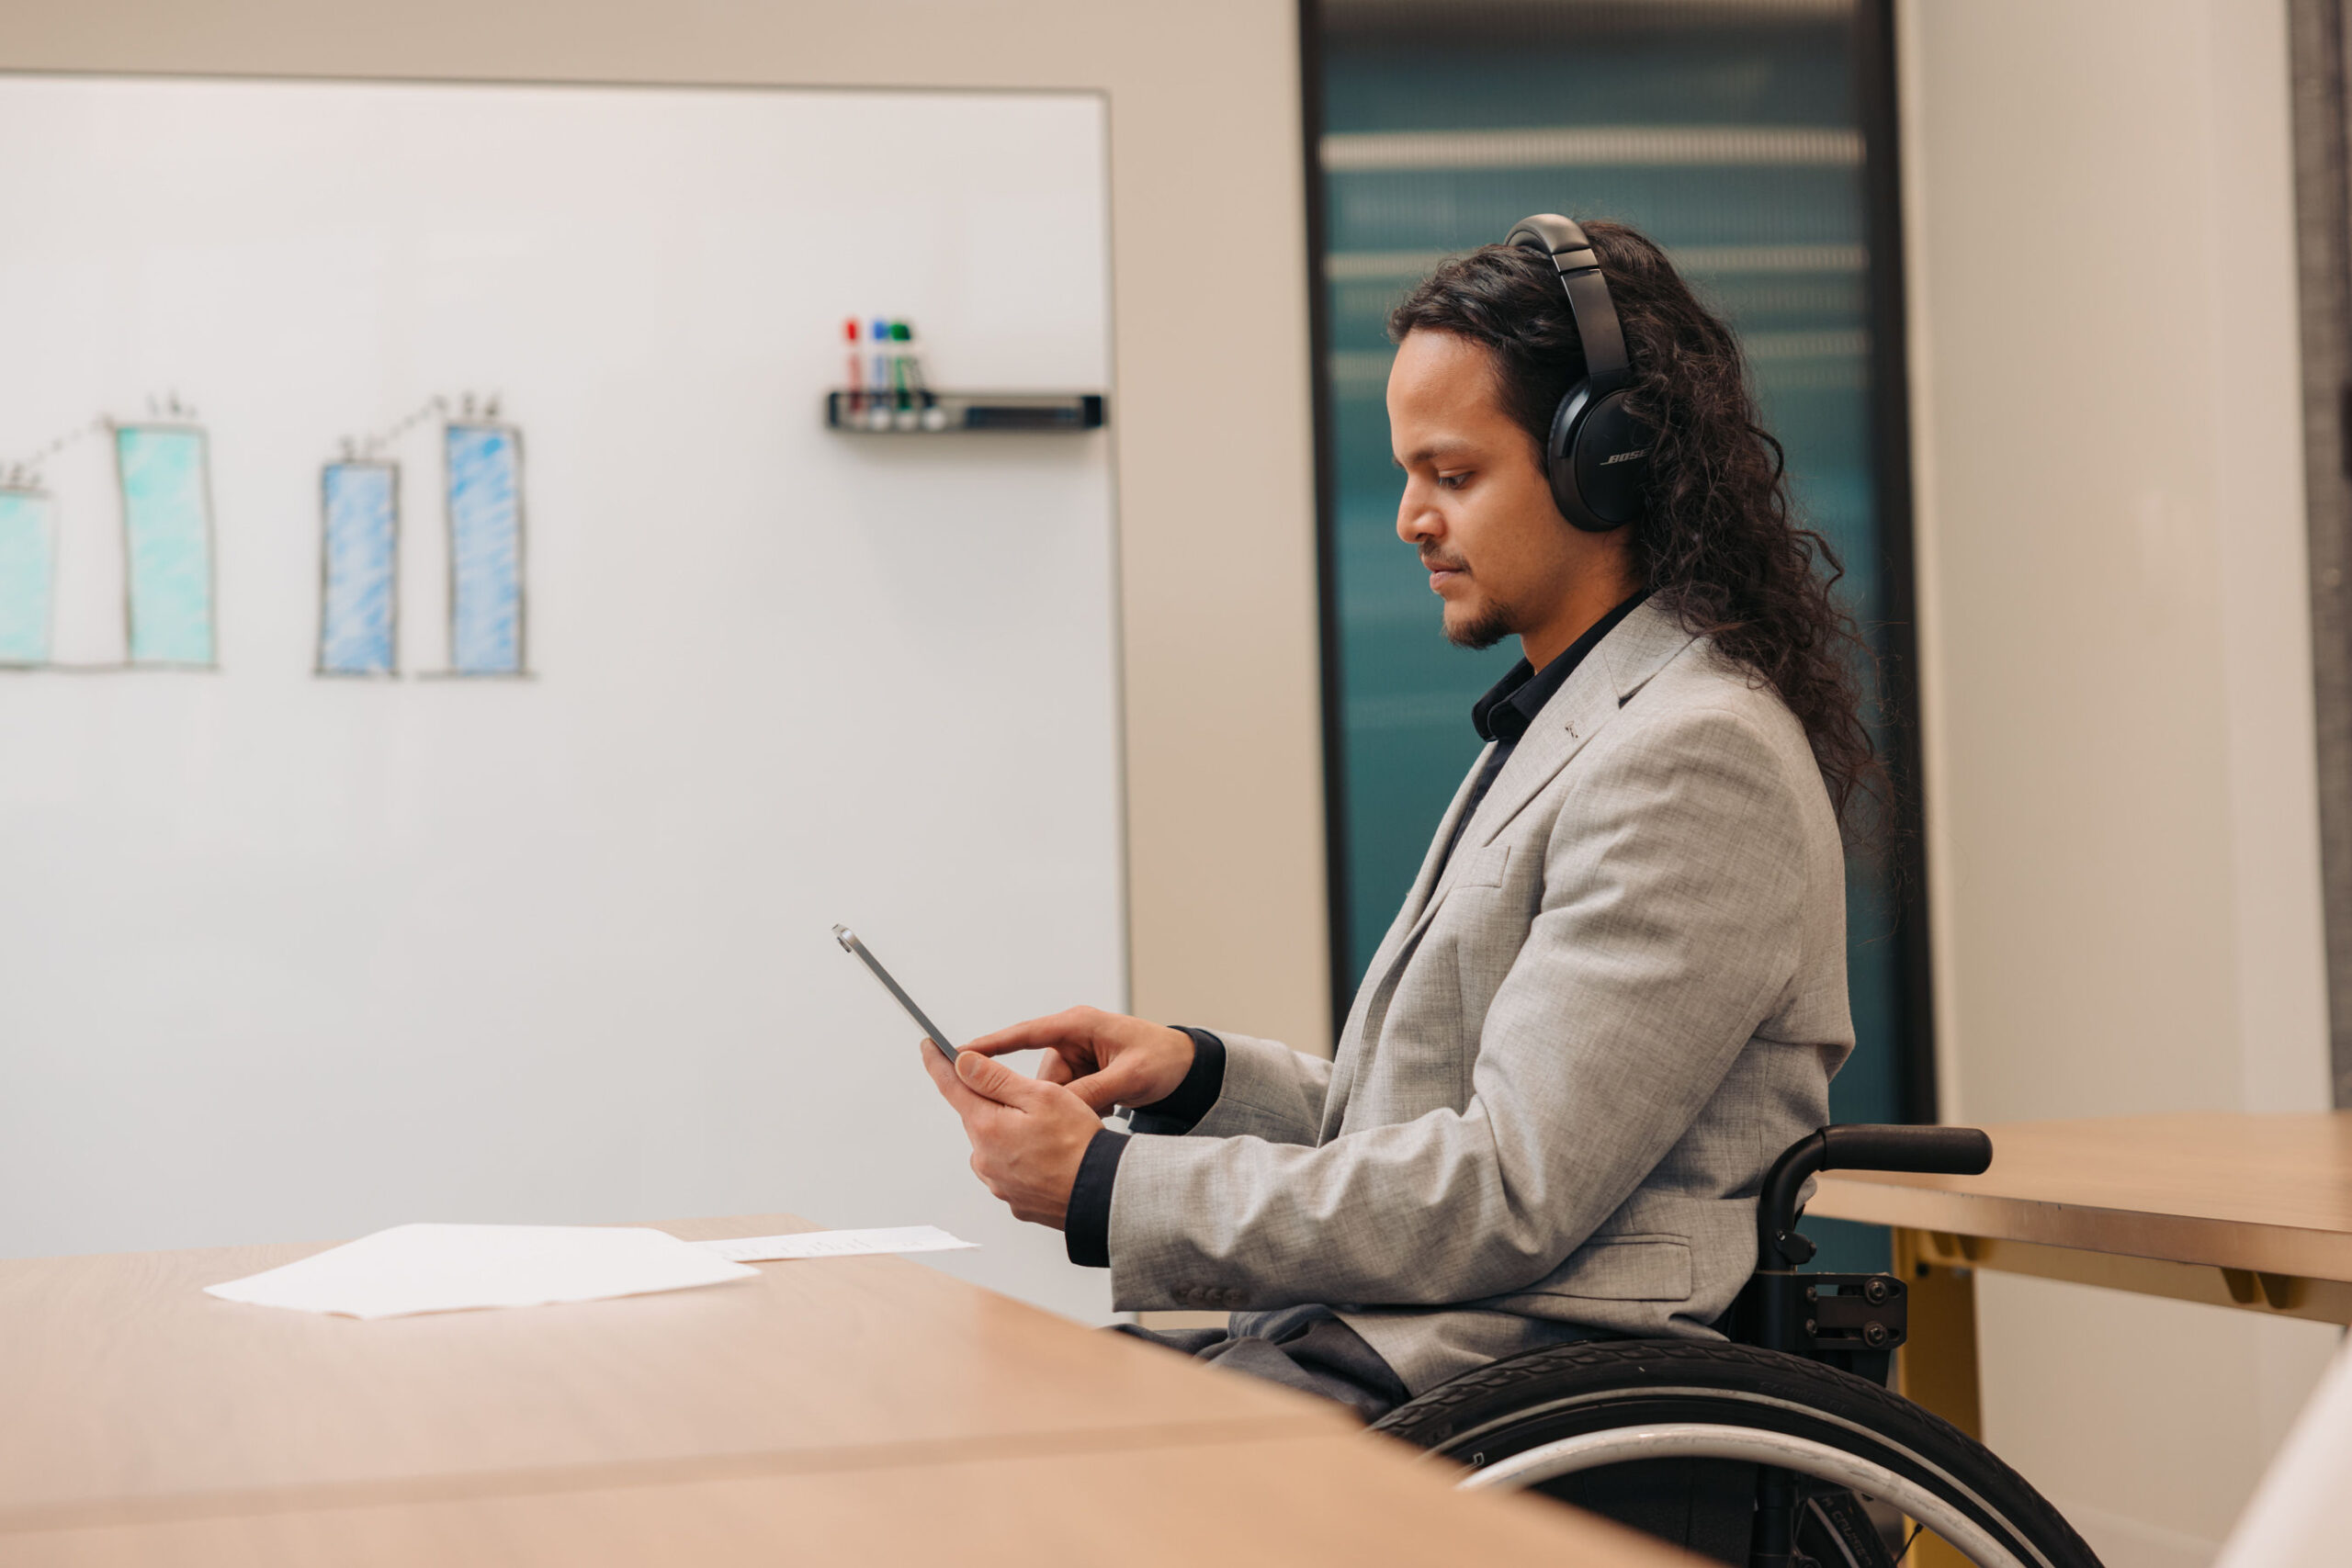 A young man using a wheelchair works in a conference room. He wears noise-cancelling headphones and types on a tablet.